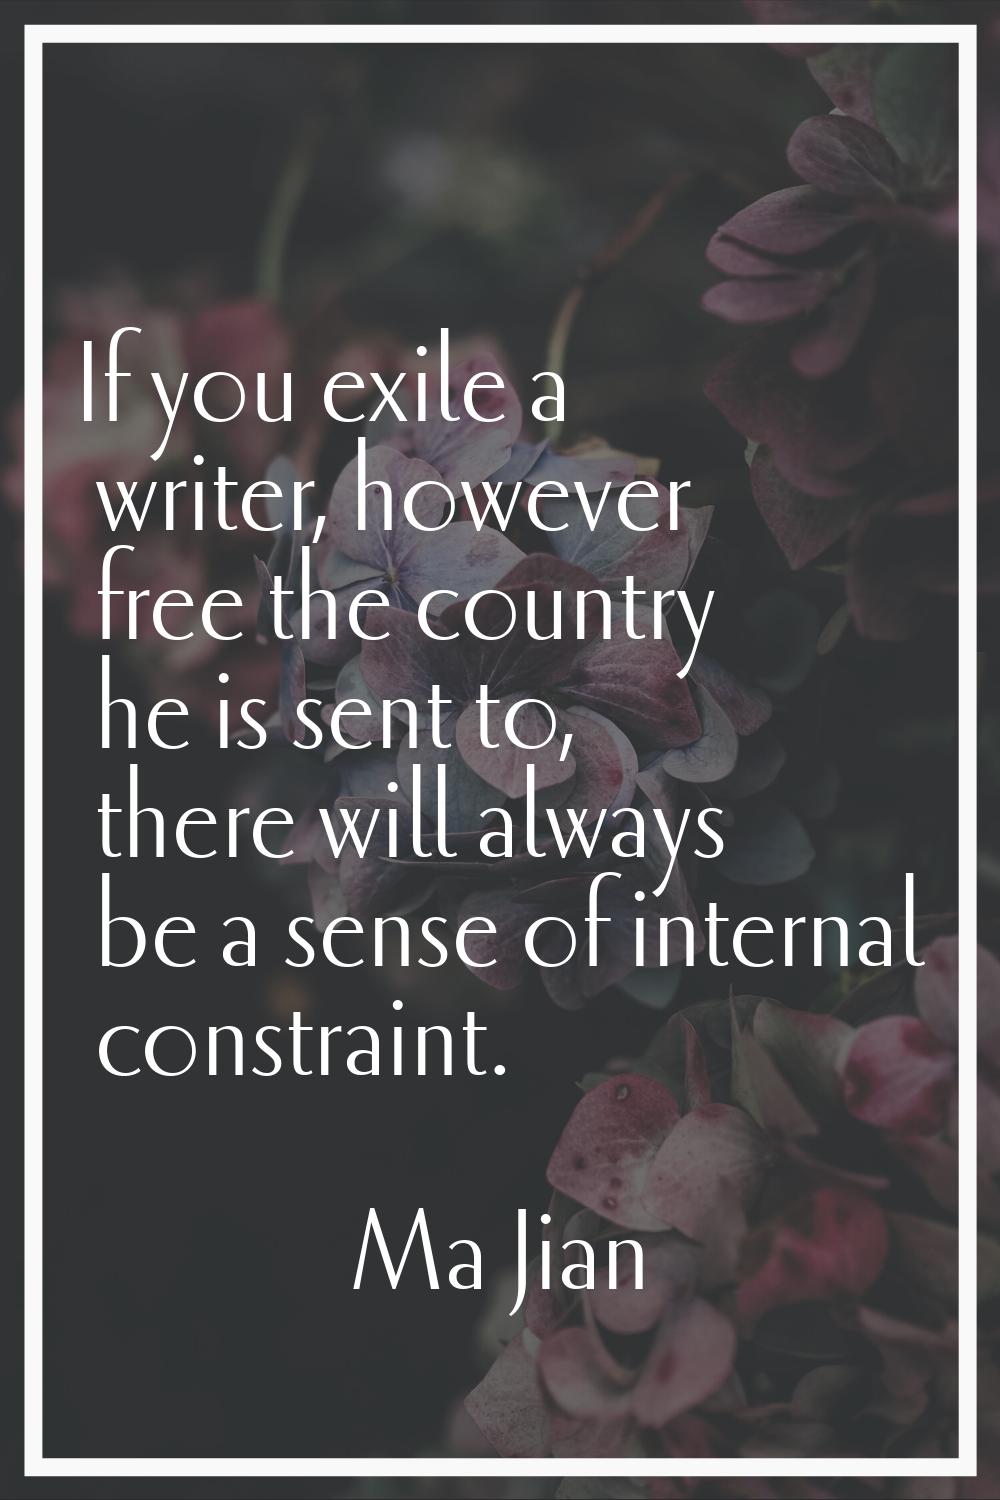 If you exile a writer, however free the country he is sent to, there will always be a sense of inte